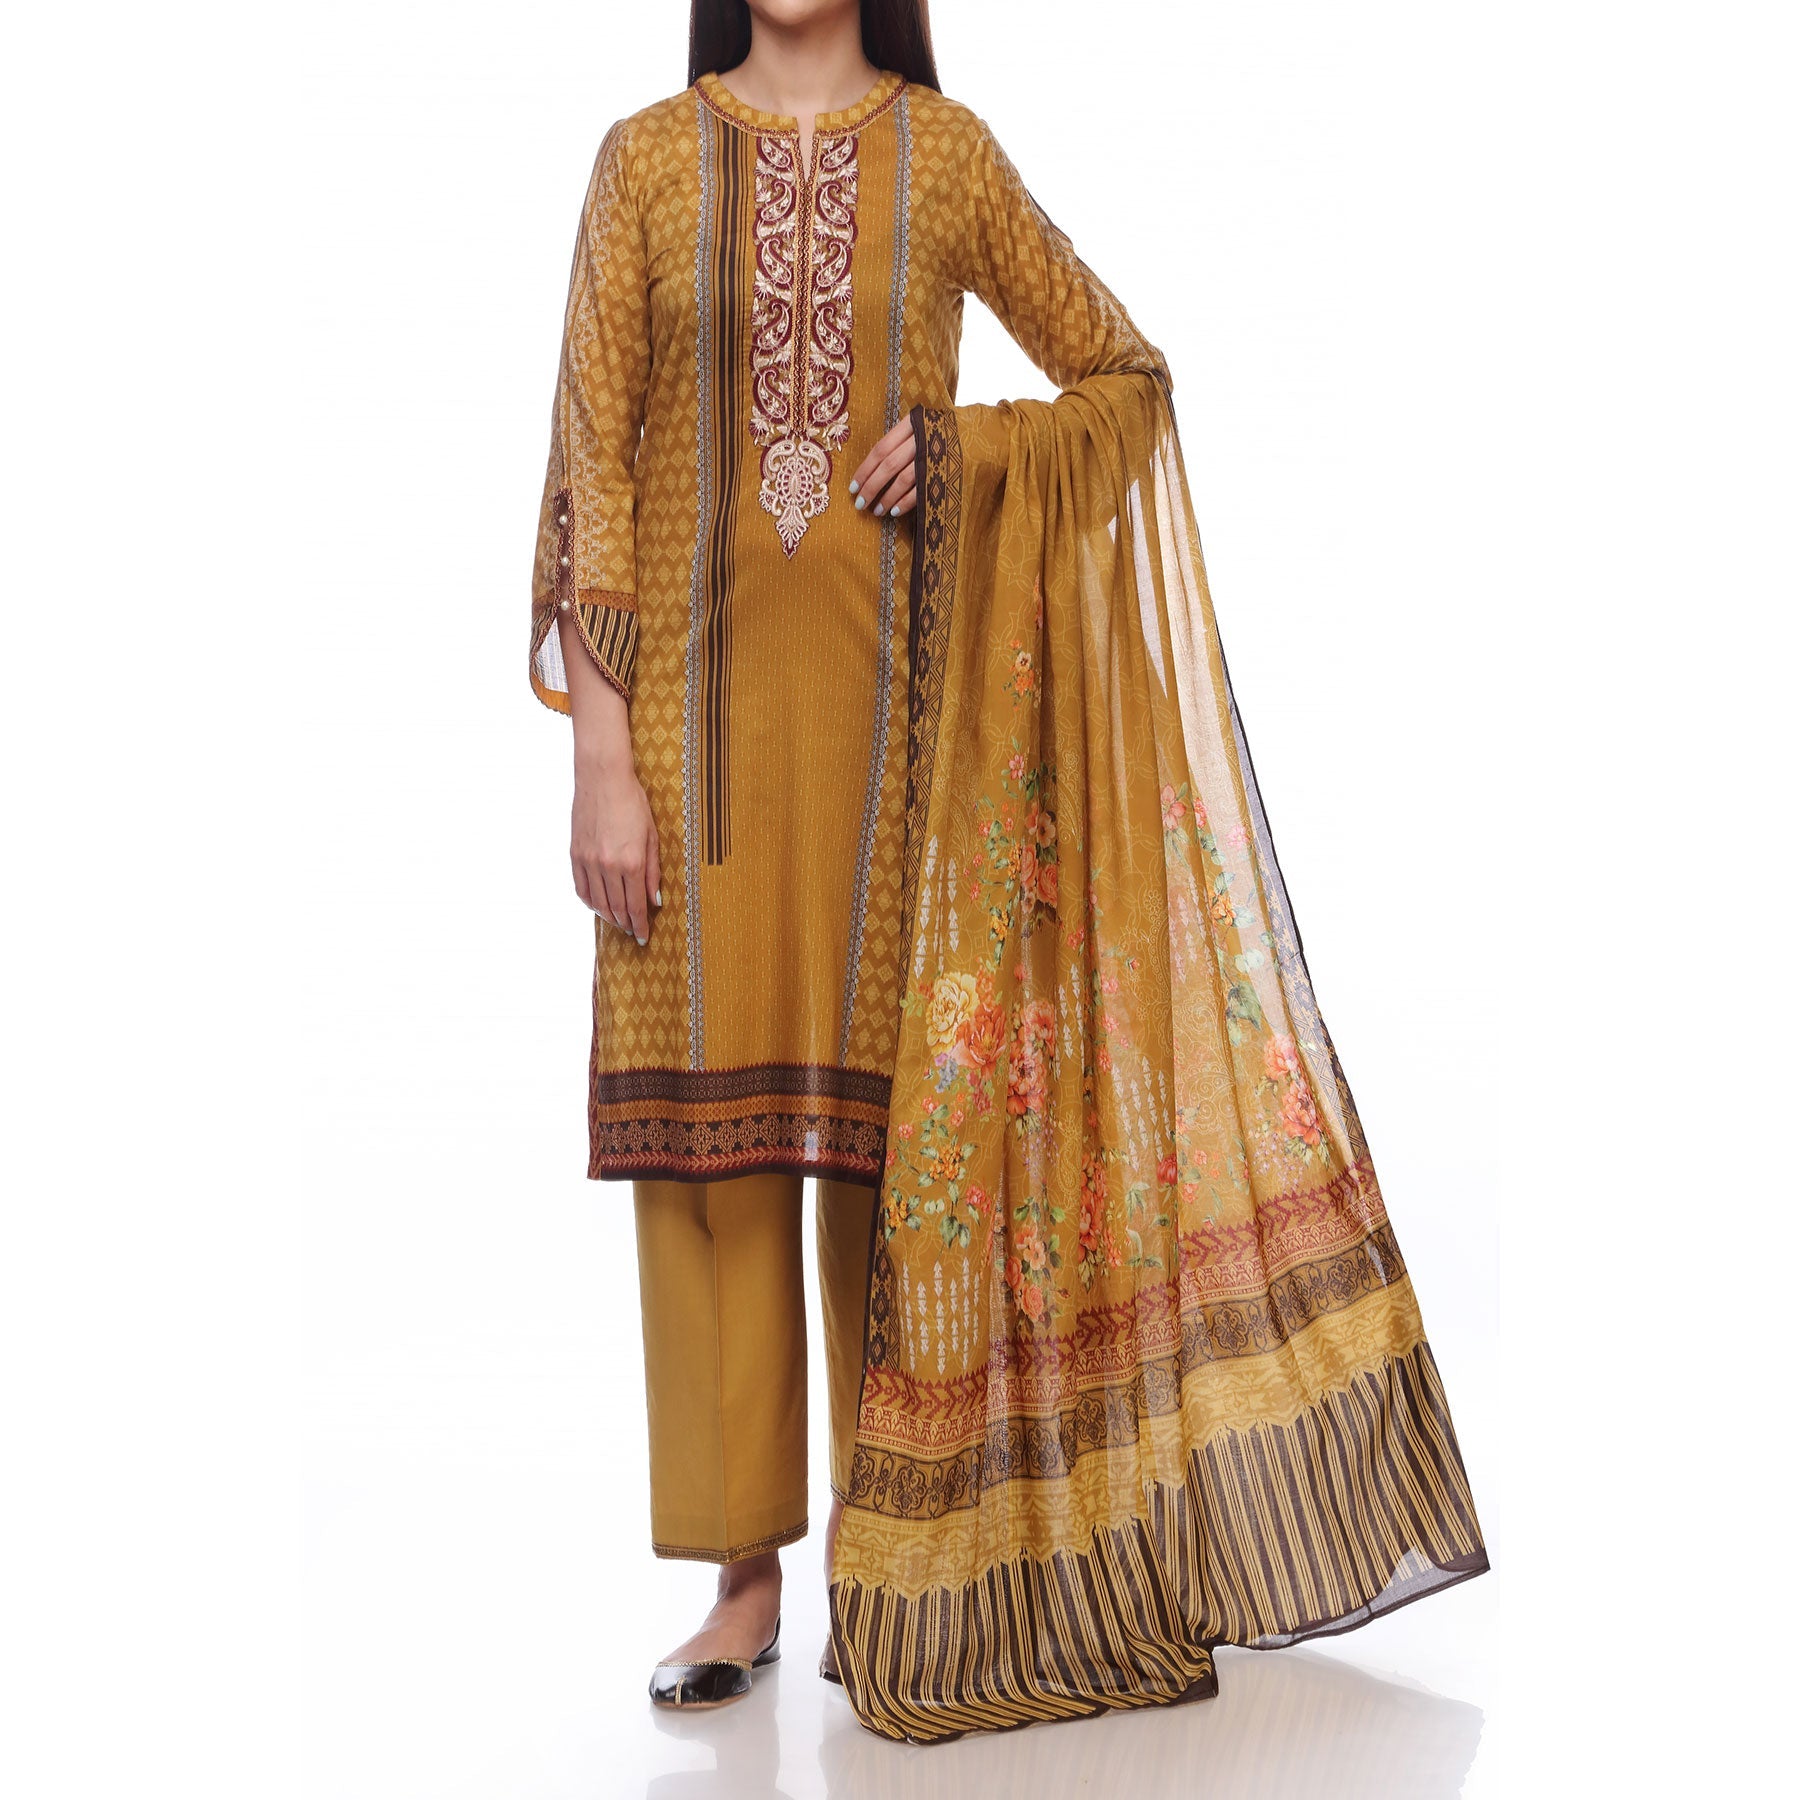 Digital Printed Lawn Shirt With Embroiderd Neck Line
Digital Printed Lawn Duppata
Plain Dyed Cambric Trousers